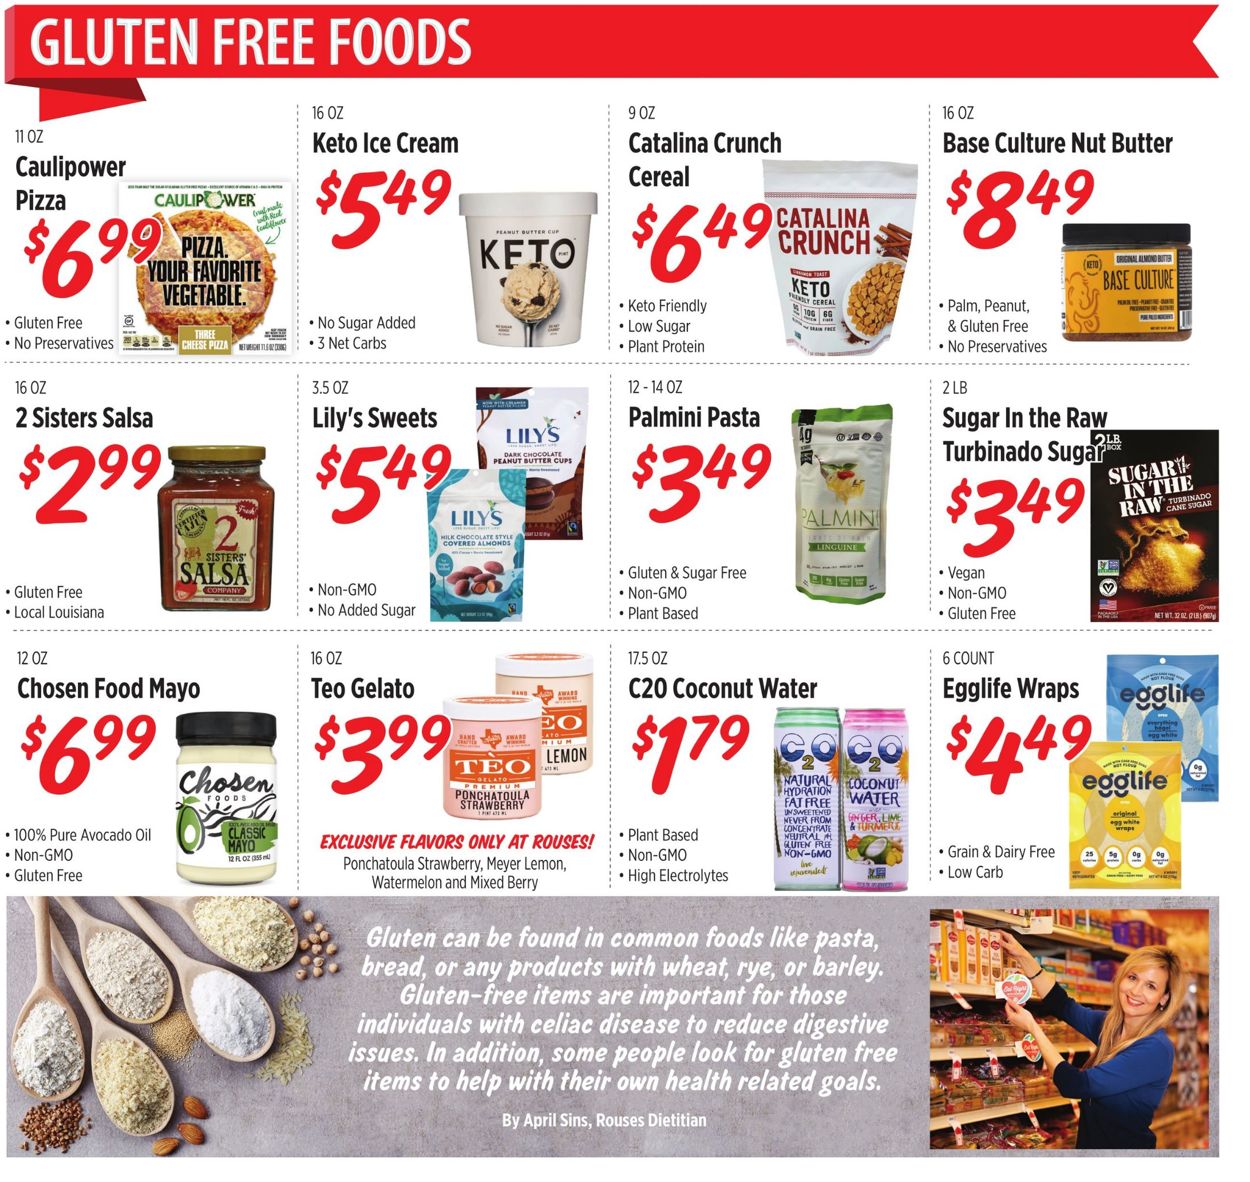 Rouses Ad from 08/04/2021